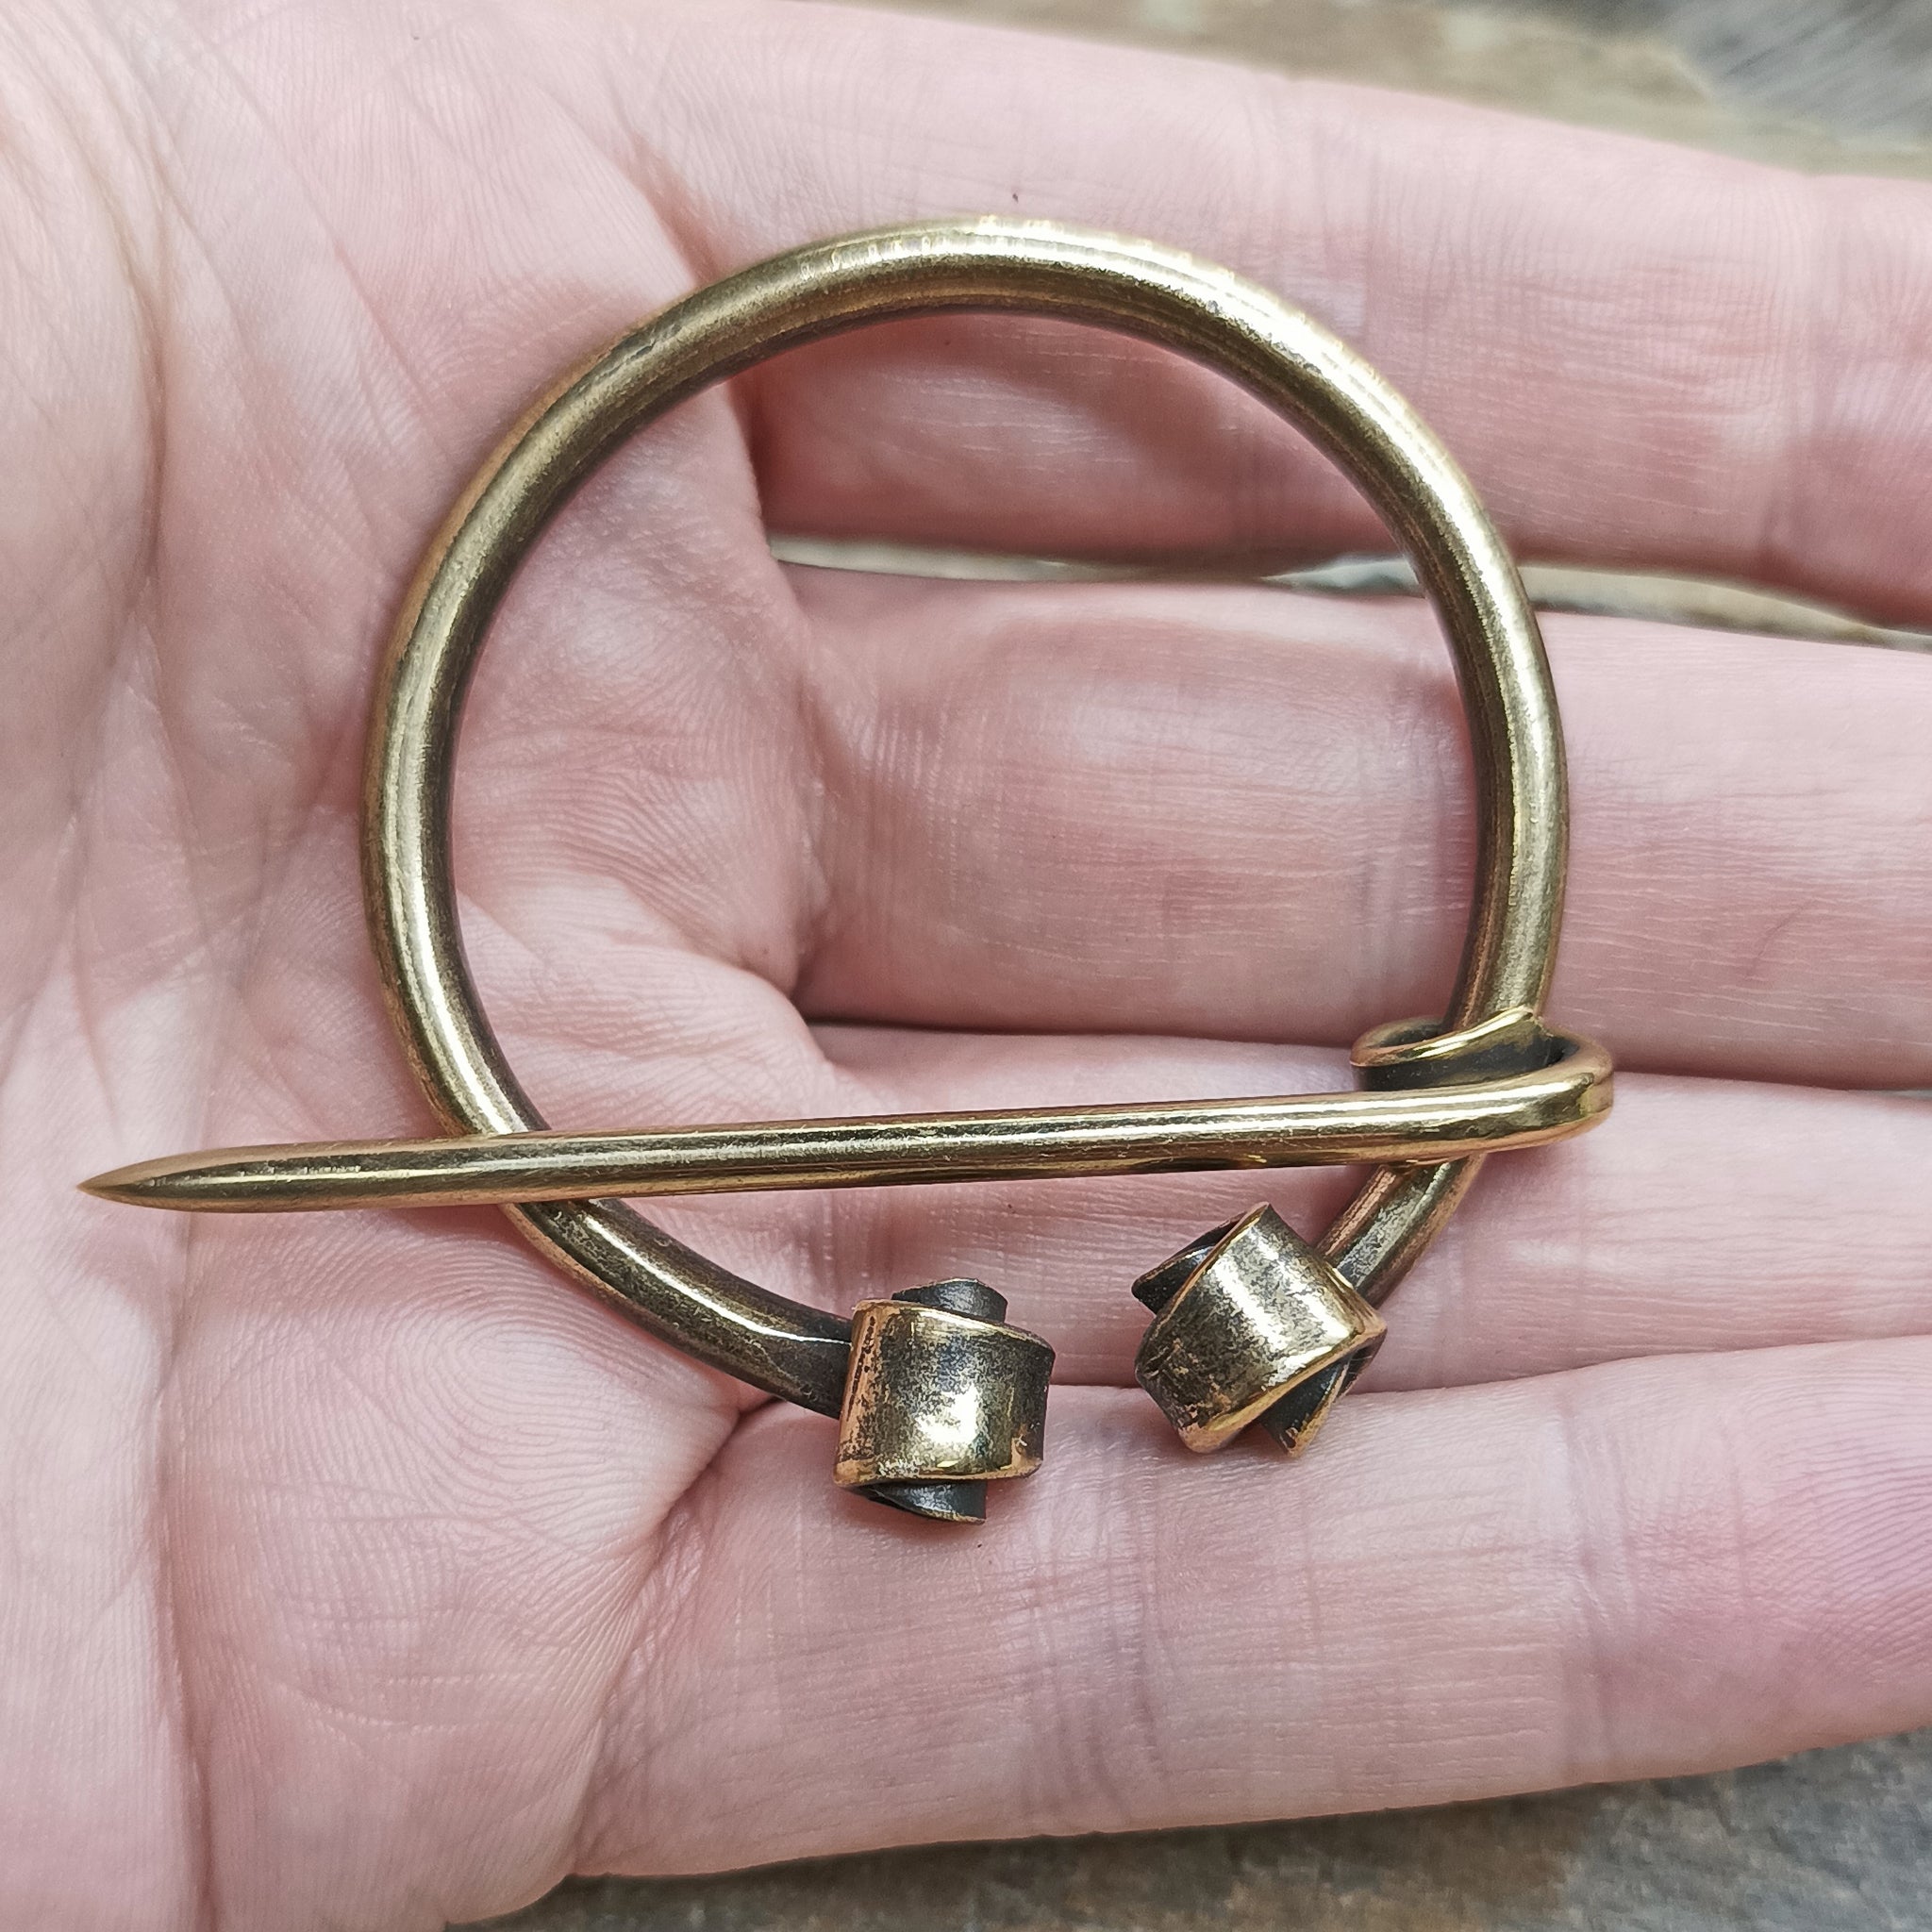 50mm Brass Cloak Pin / Clothes Pin on Hand